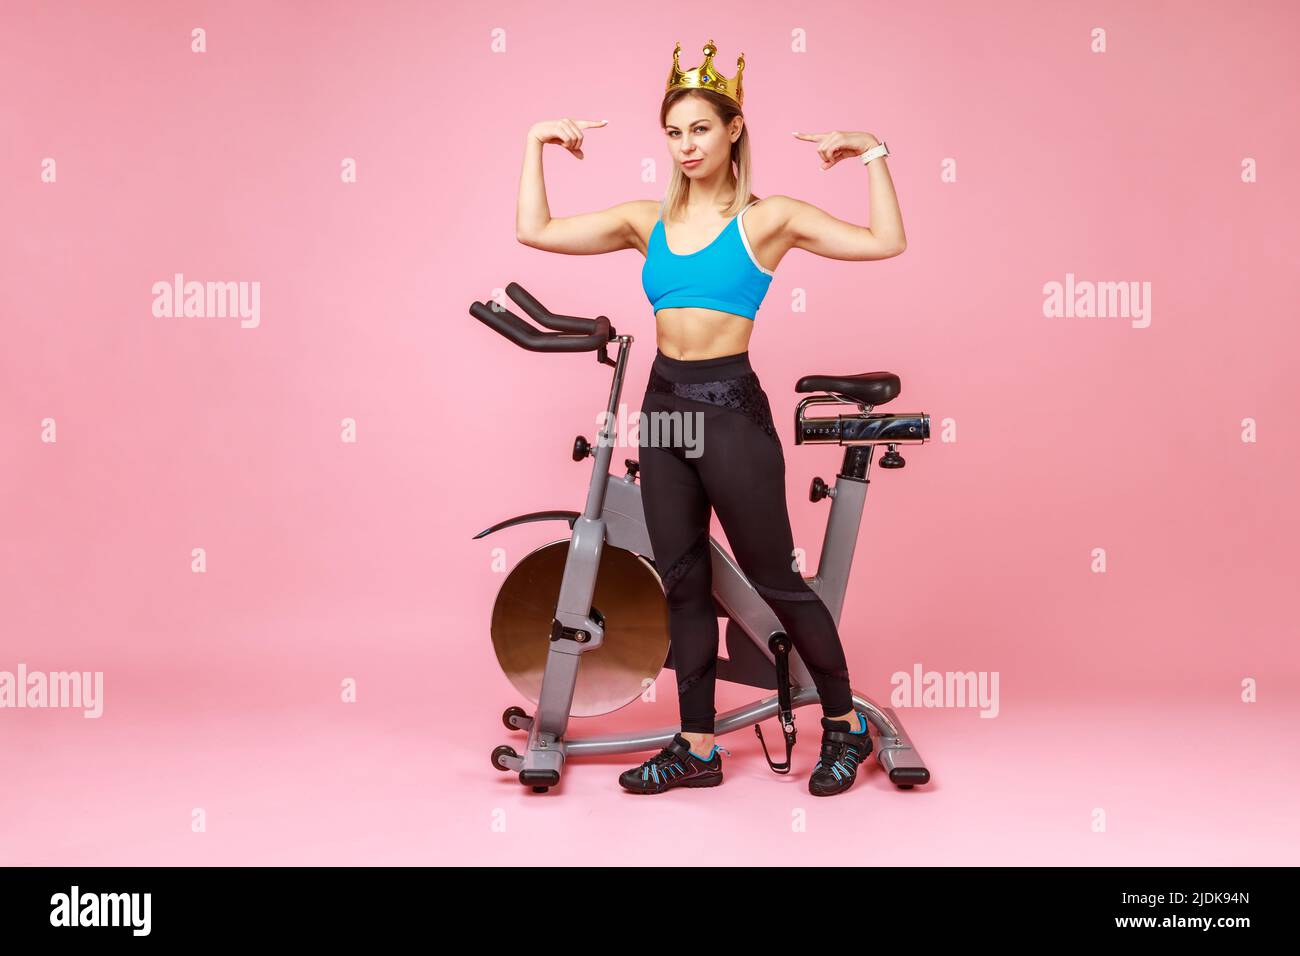 Full length portrait of slim confident sporty woman in golden crown standing near exercise bike and and showing biceps, raising arms. Indoor studio shot isolated on pink background. Stock Photo